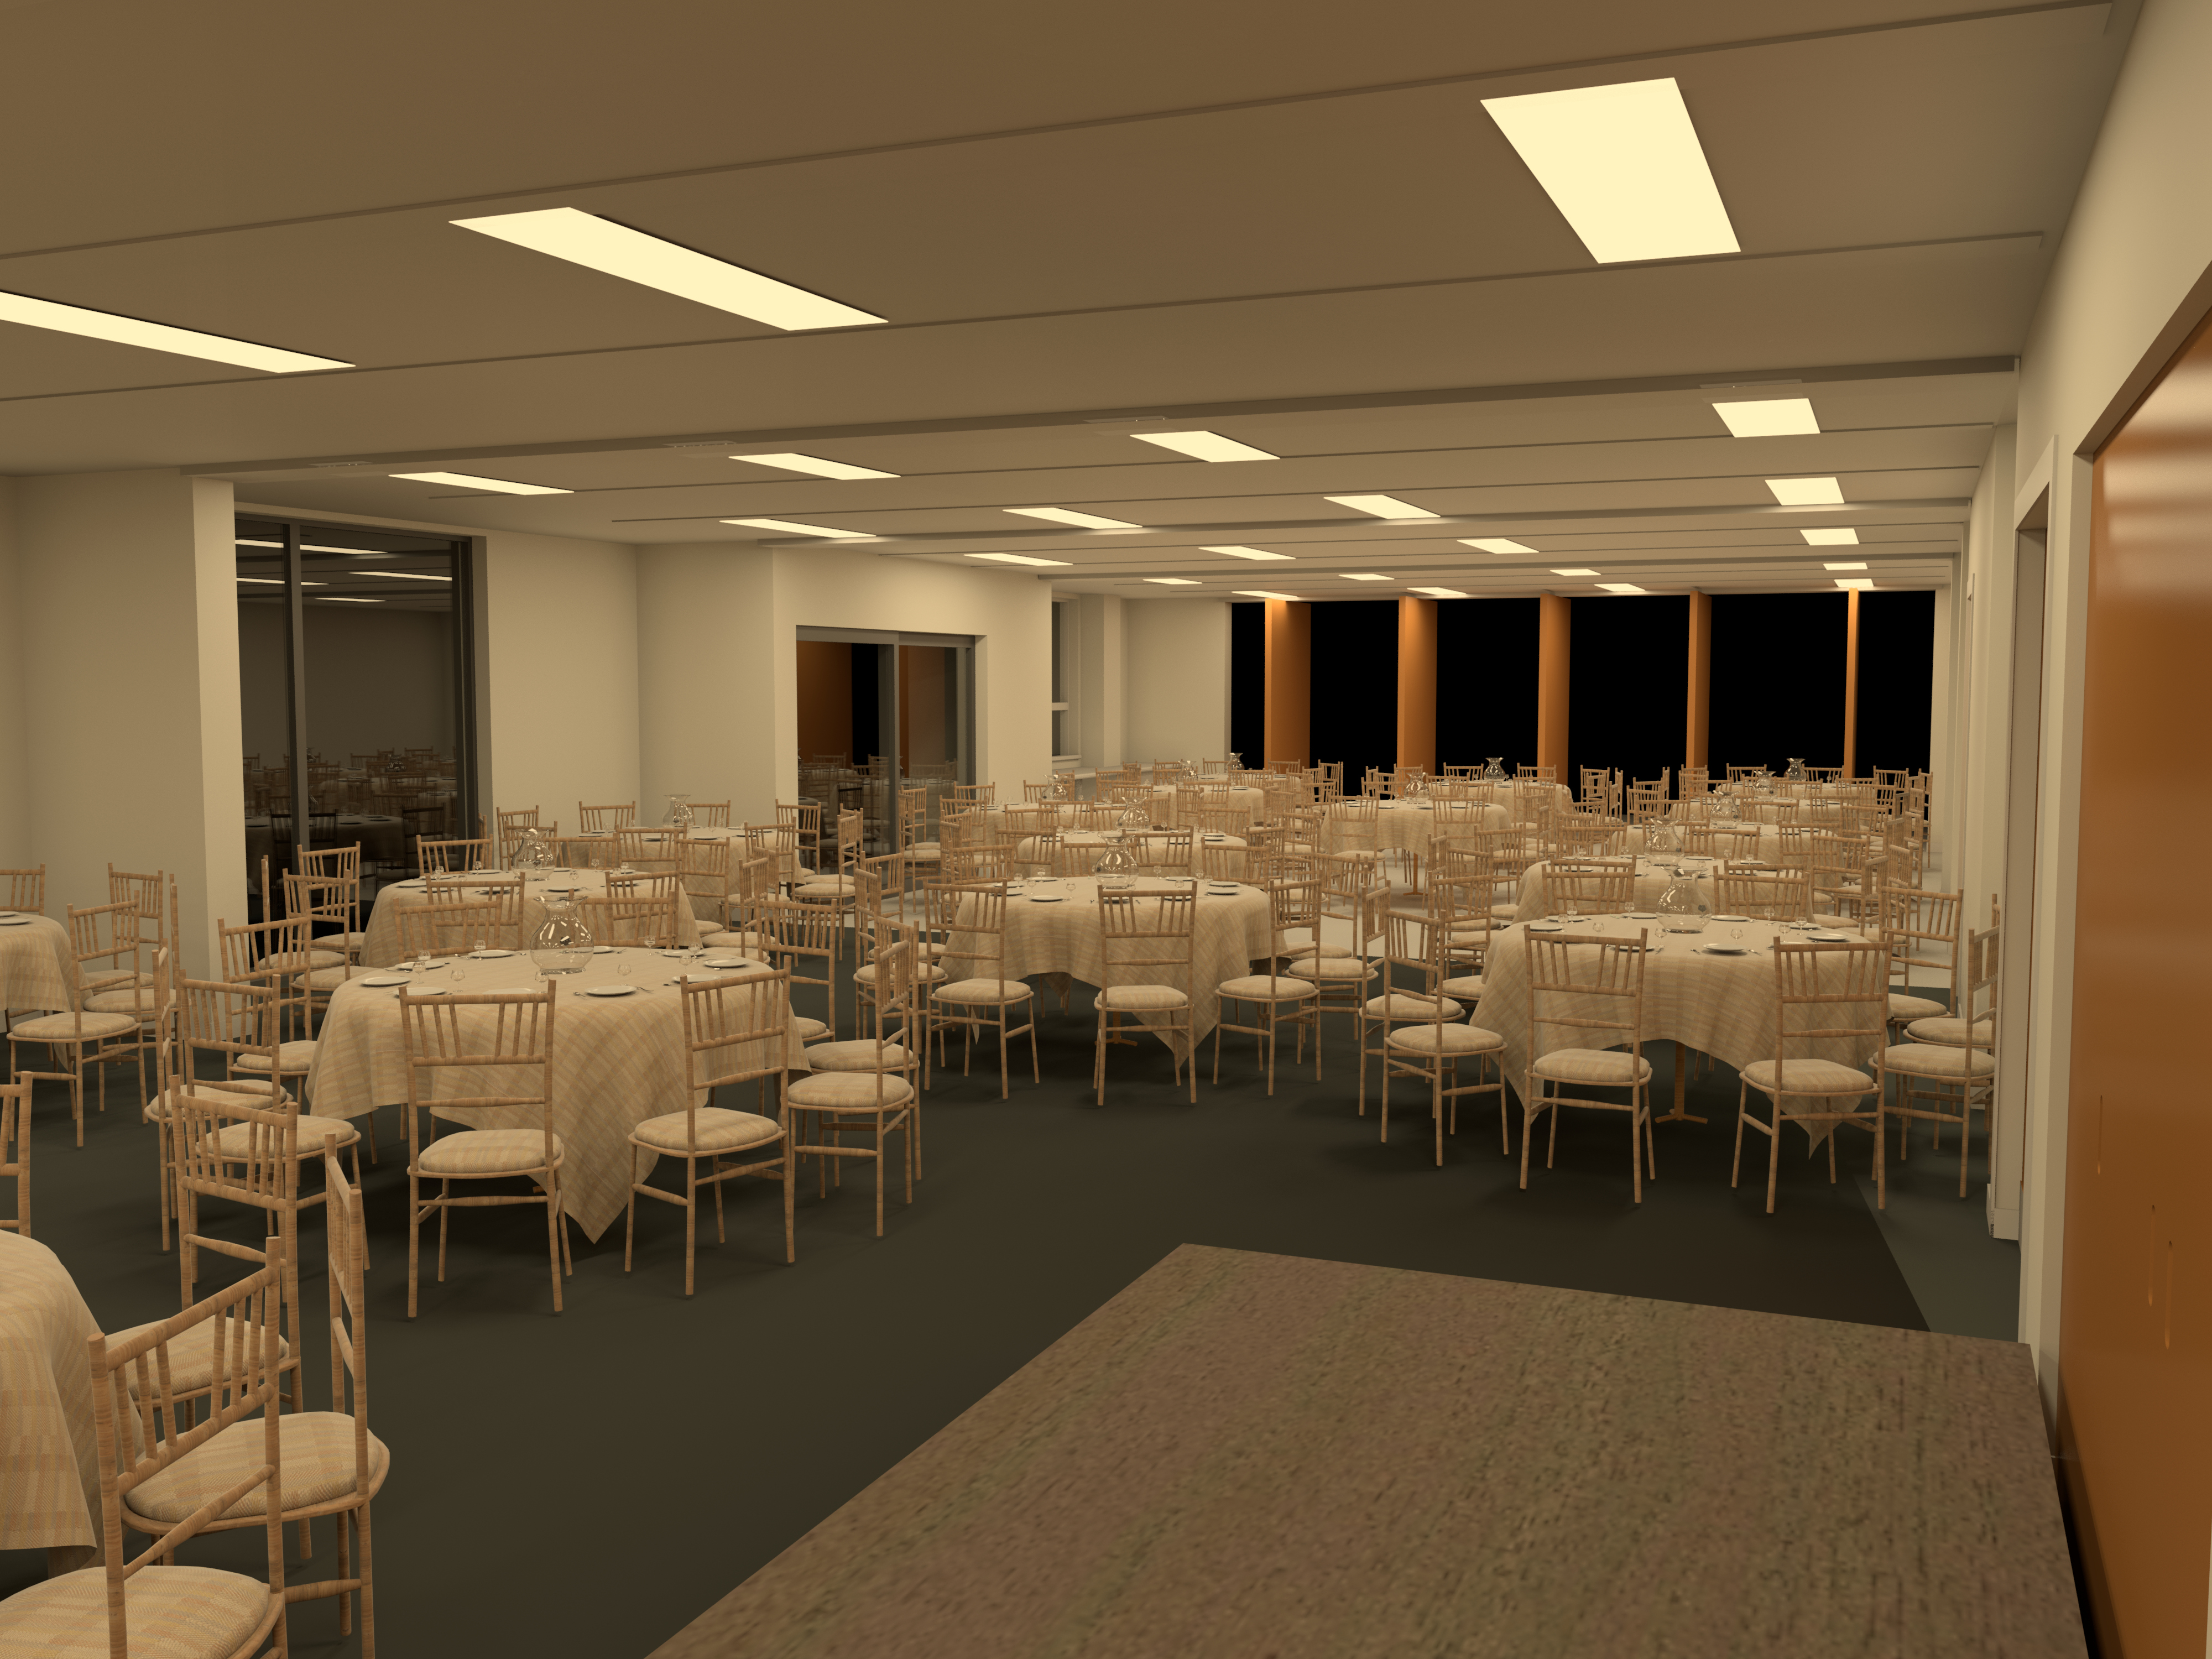 A realistic 3D render of a room setup for a round table dinner party.